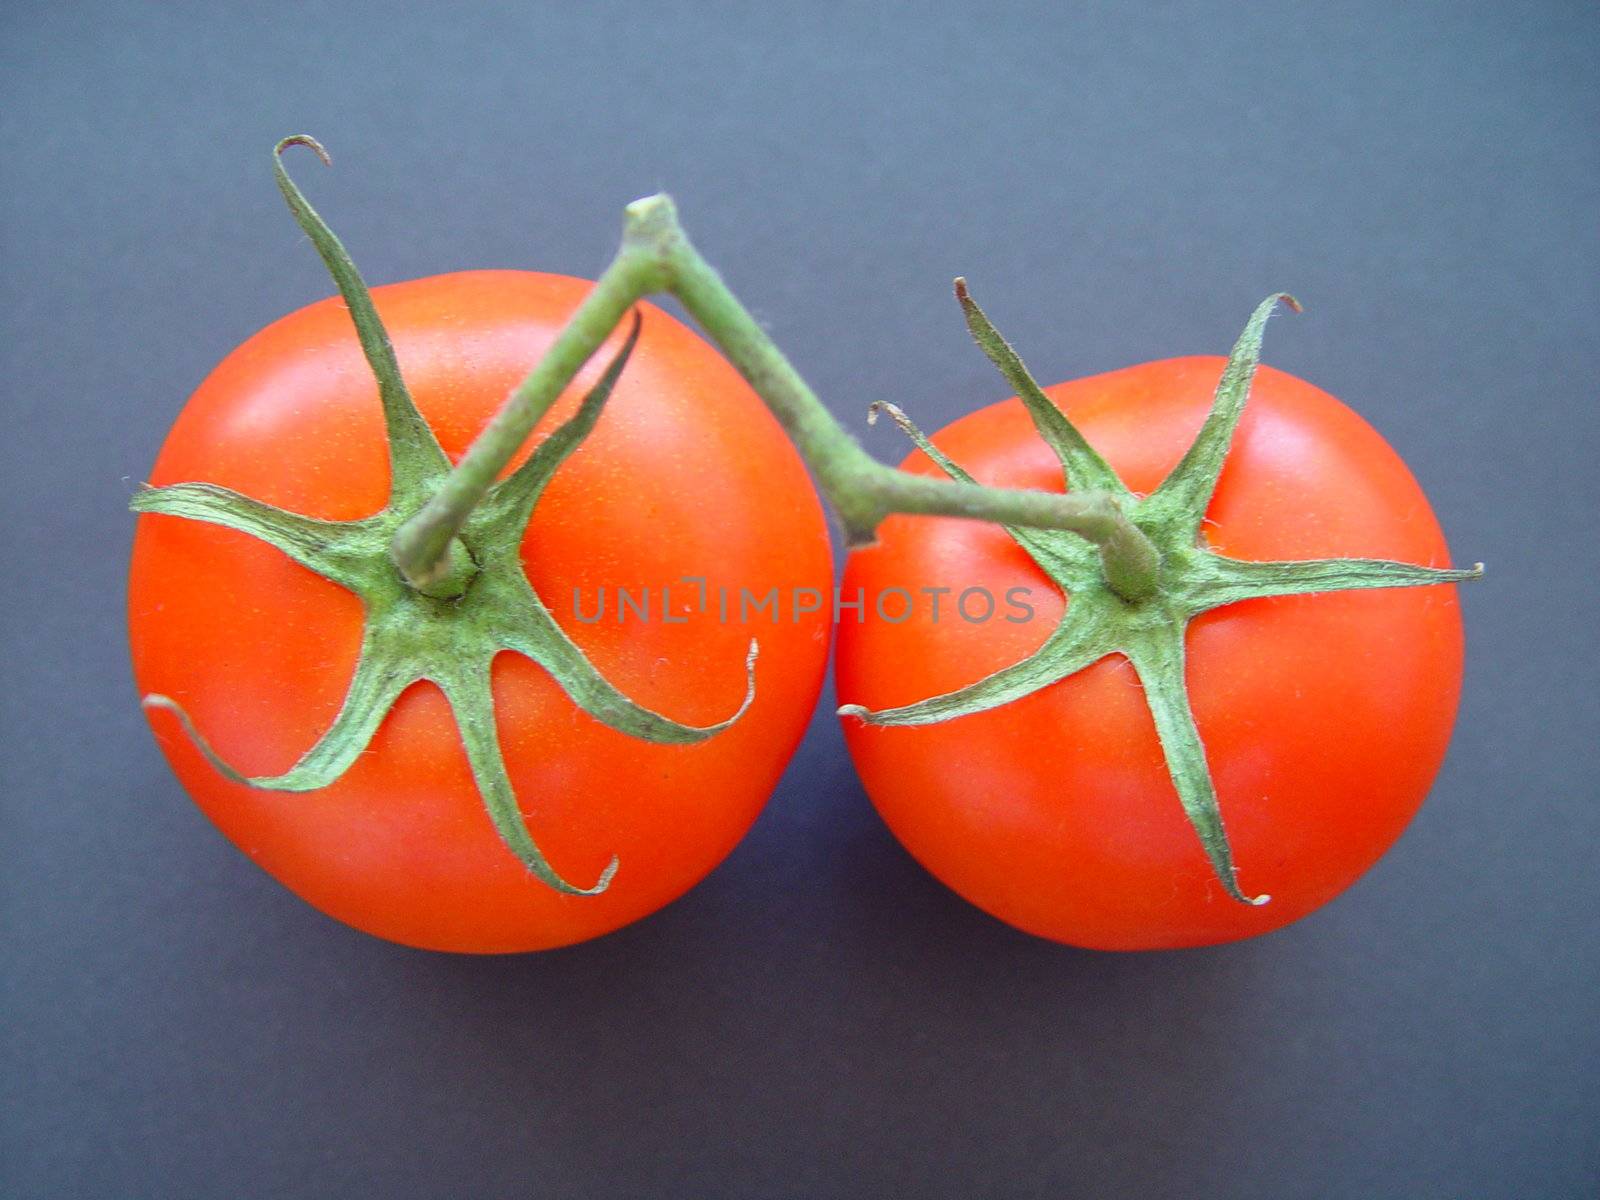 Tomatoes by Flaps